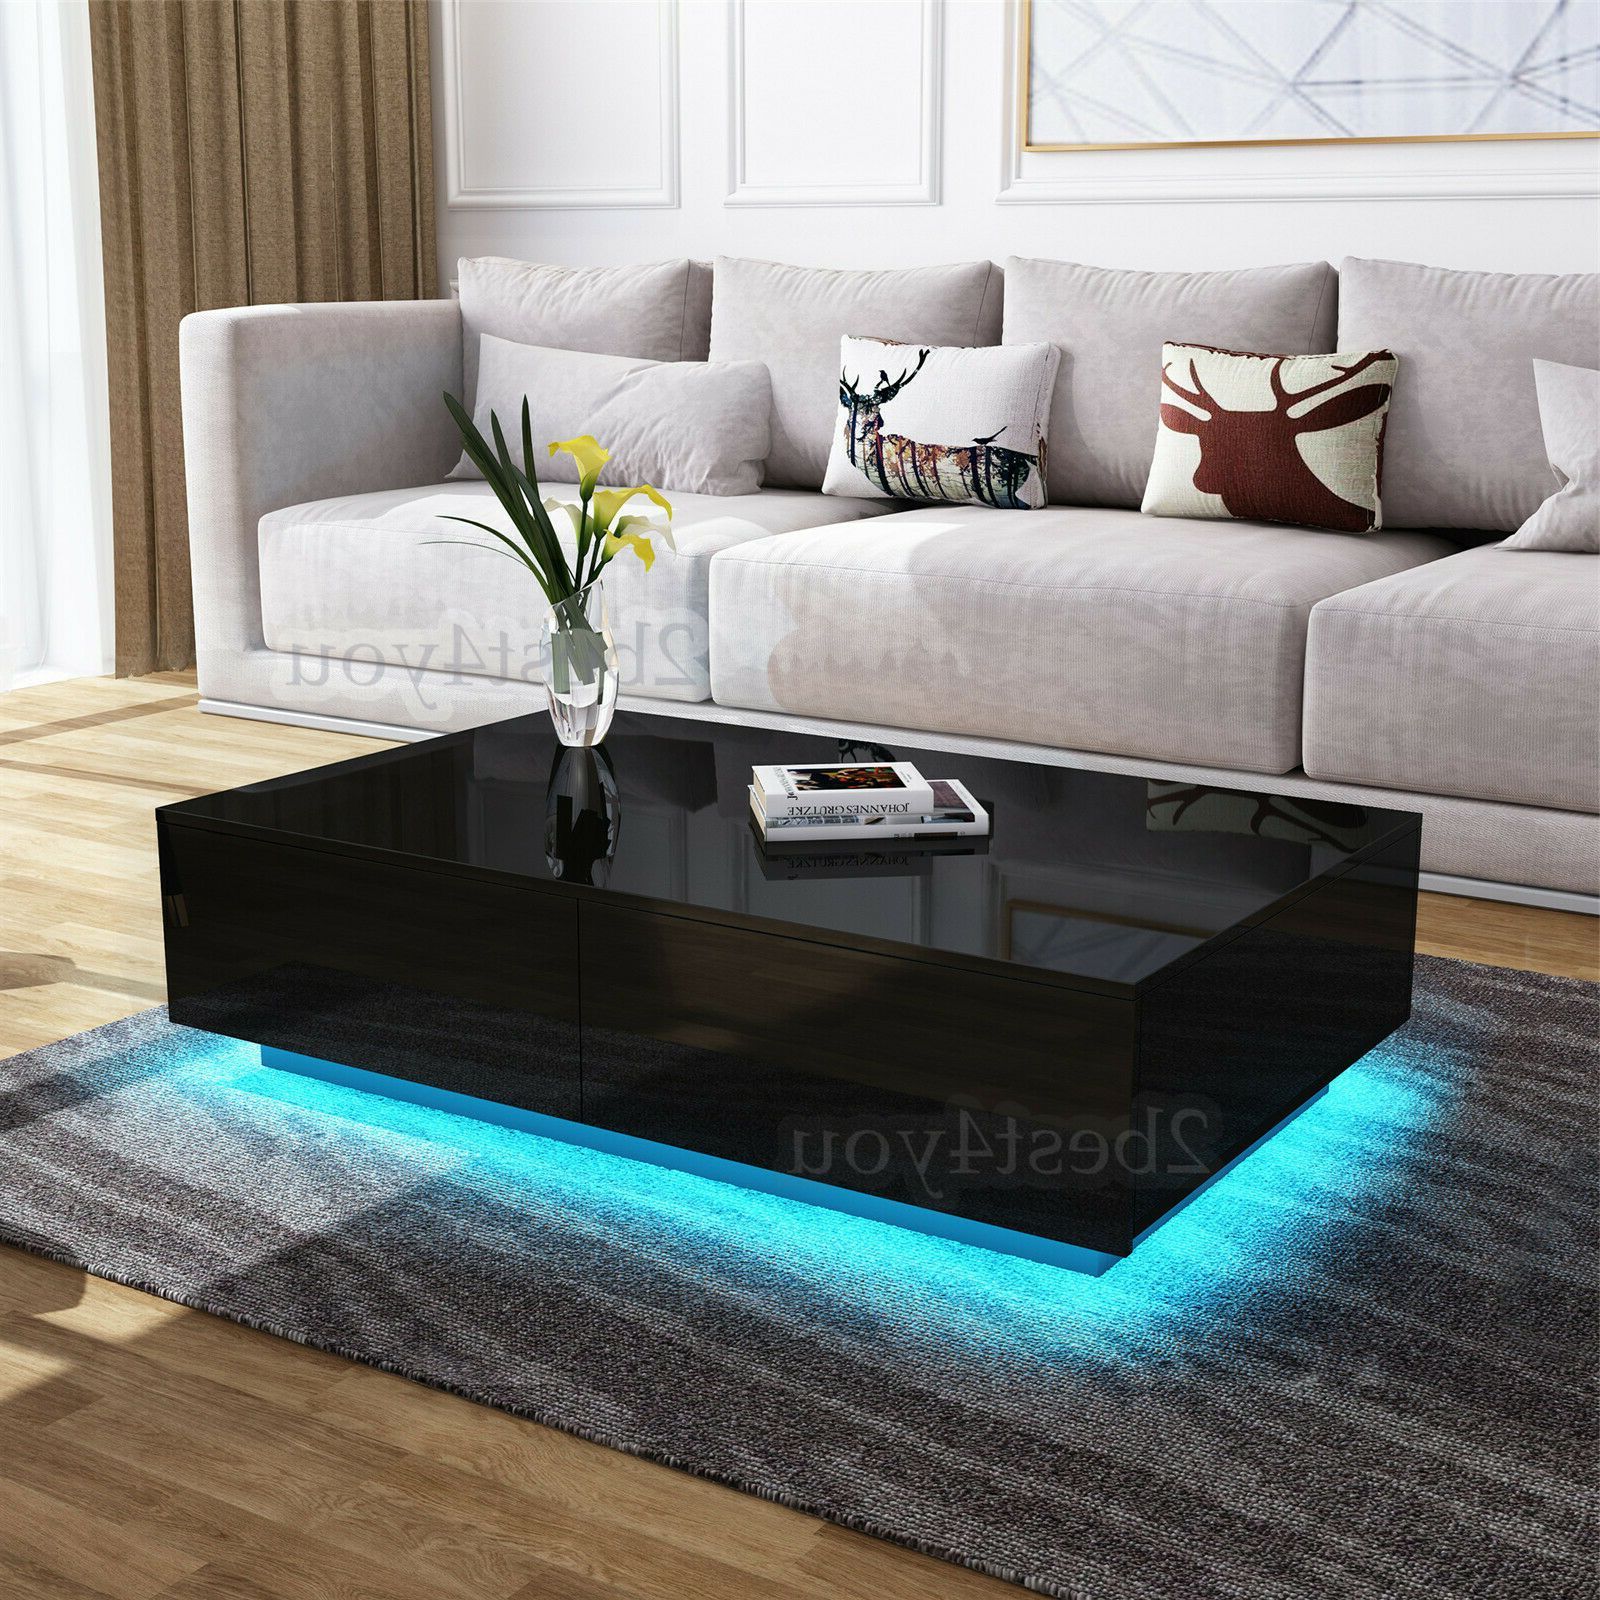 Modern Coffee Table With Led Lights – Stellabracy For Coffee Tables With Led Lights (View 16 of 20)